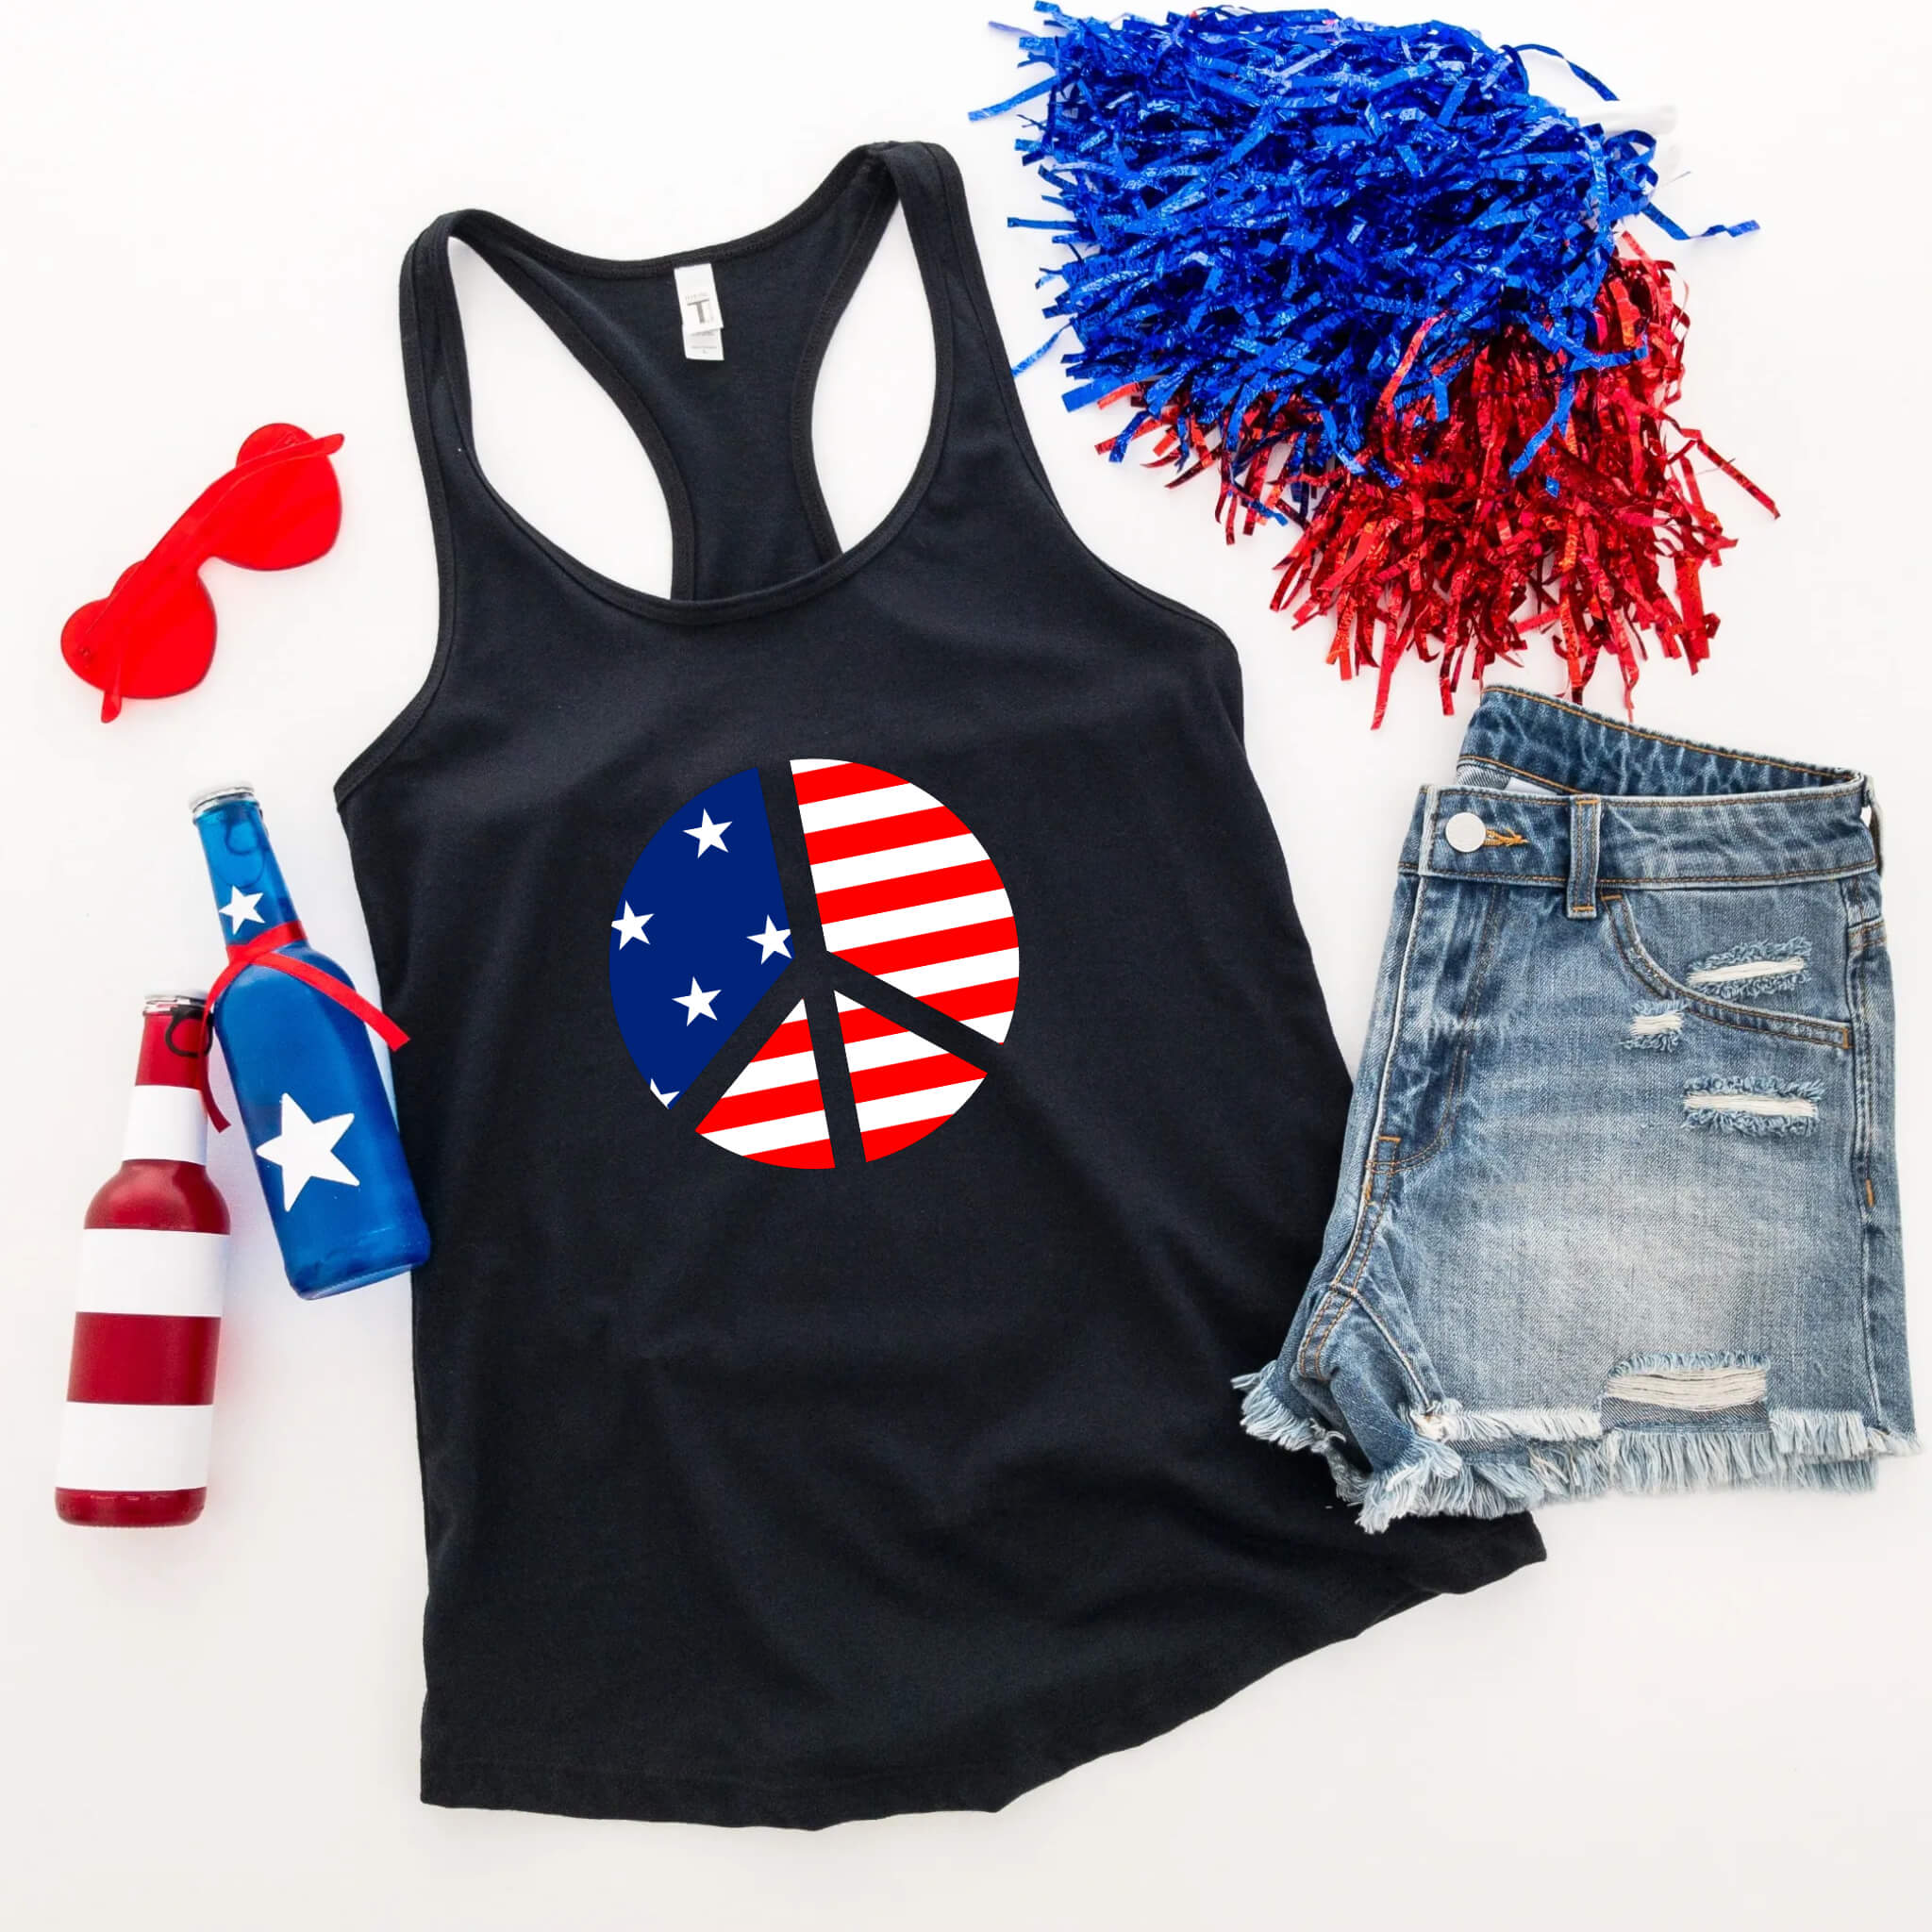 4th of July - Peace America Patriotic Graphic Print Women’s T-Shirt / Tank Top